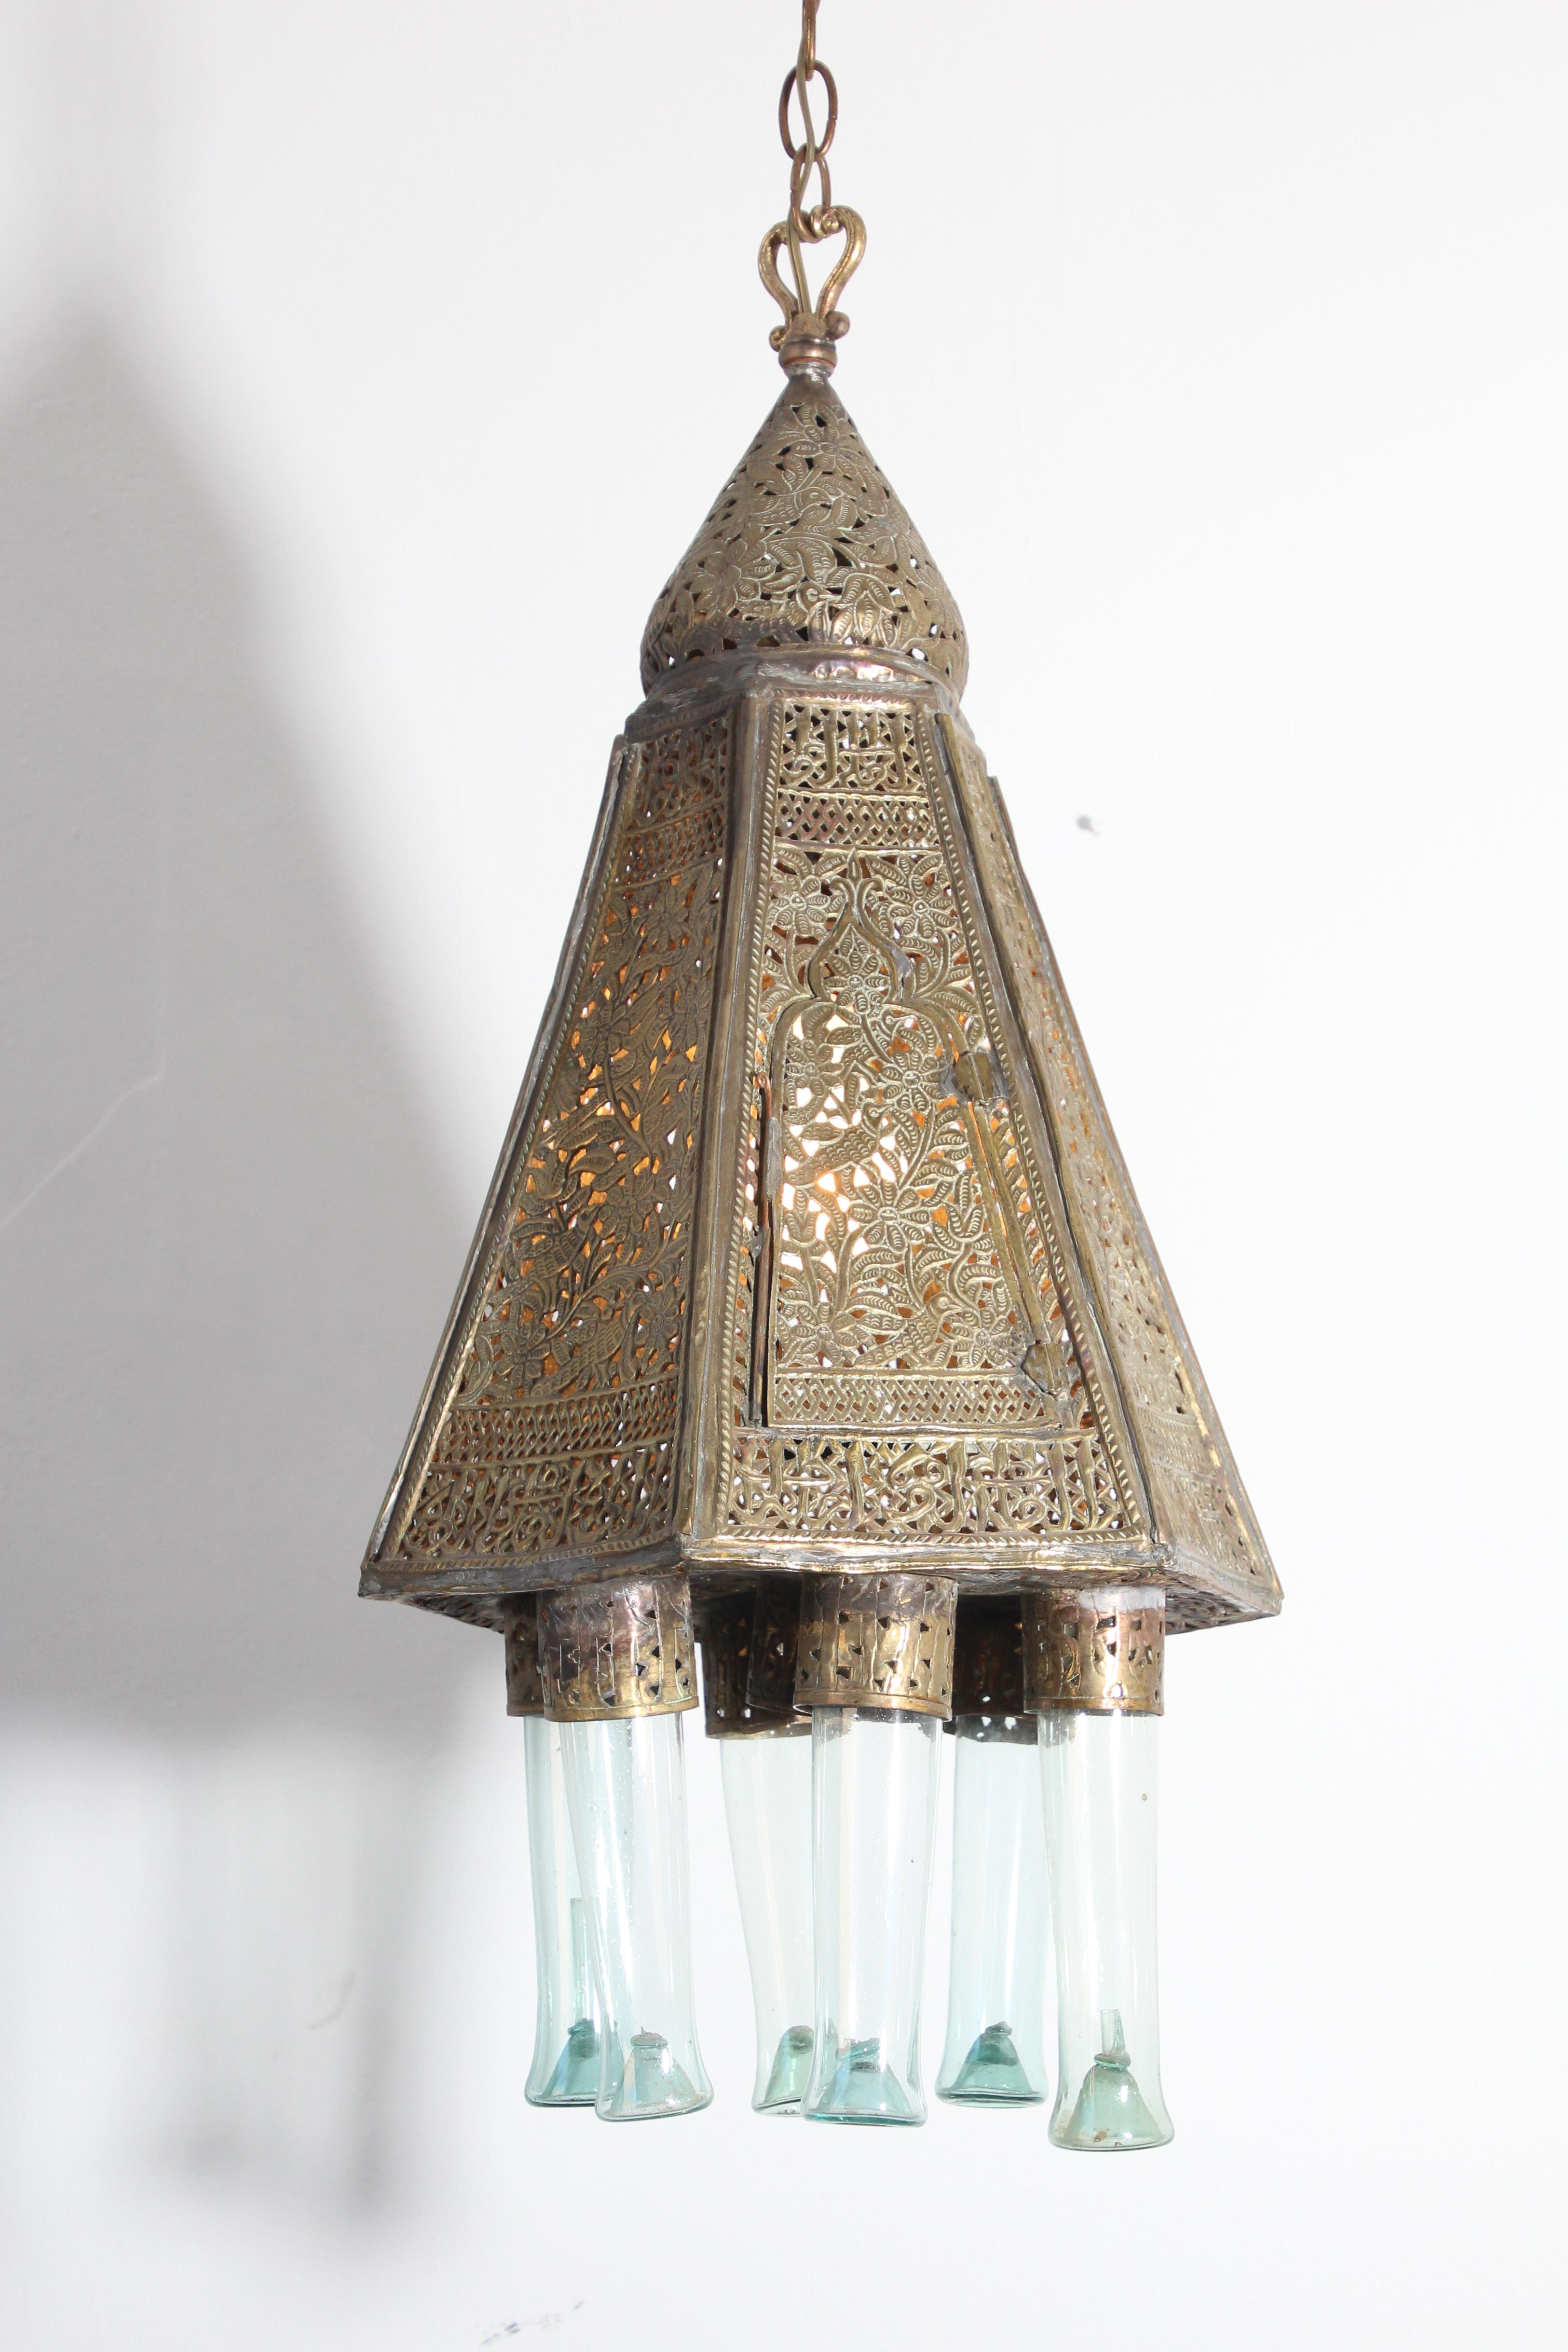 Antique Moorish brass Turkish palace lamp.
Moorish style brass antique pendant with 6 handblown Bohemian glass.
The brass is delicately hand-hammered and chiseled into Arabic Islamic calligraphy writing designs and floral patterns on six sides,